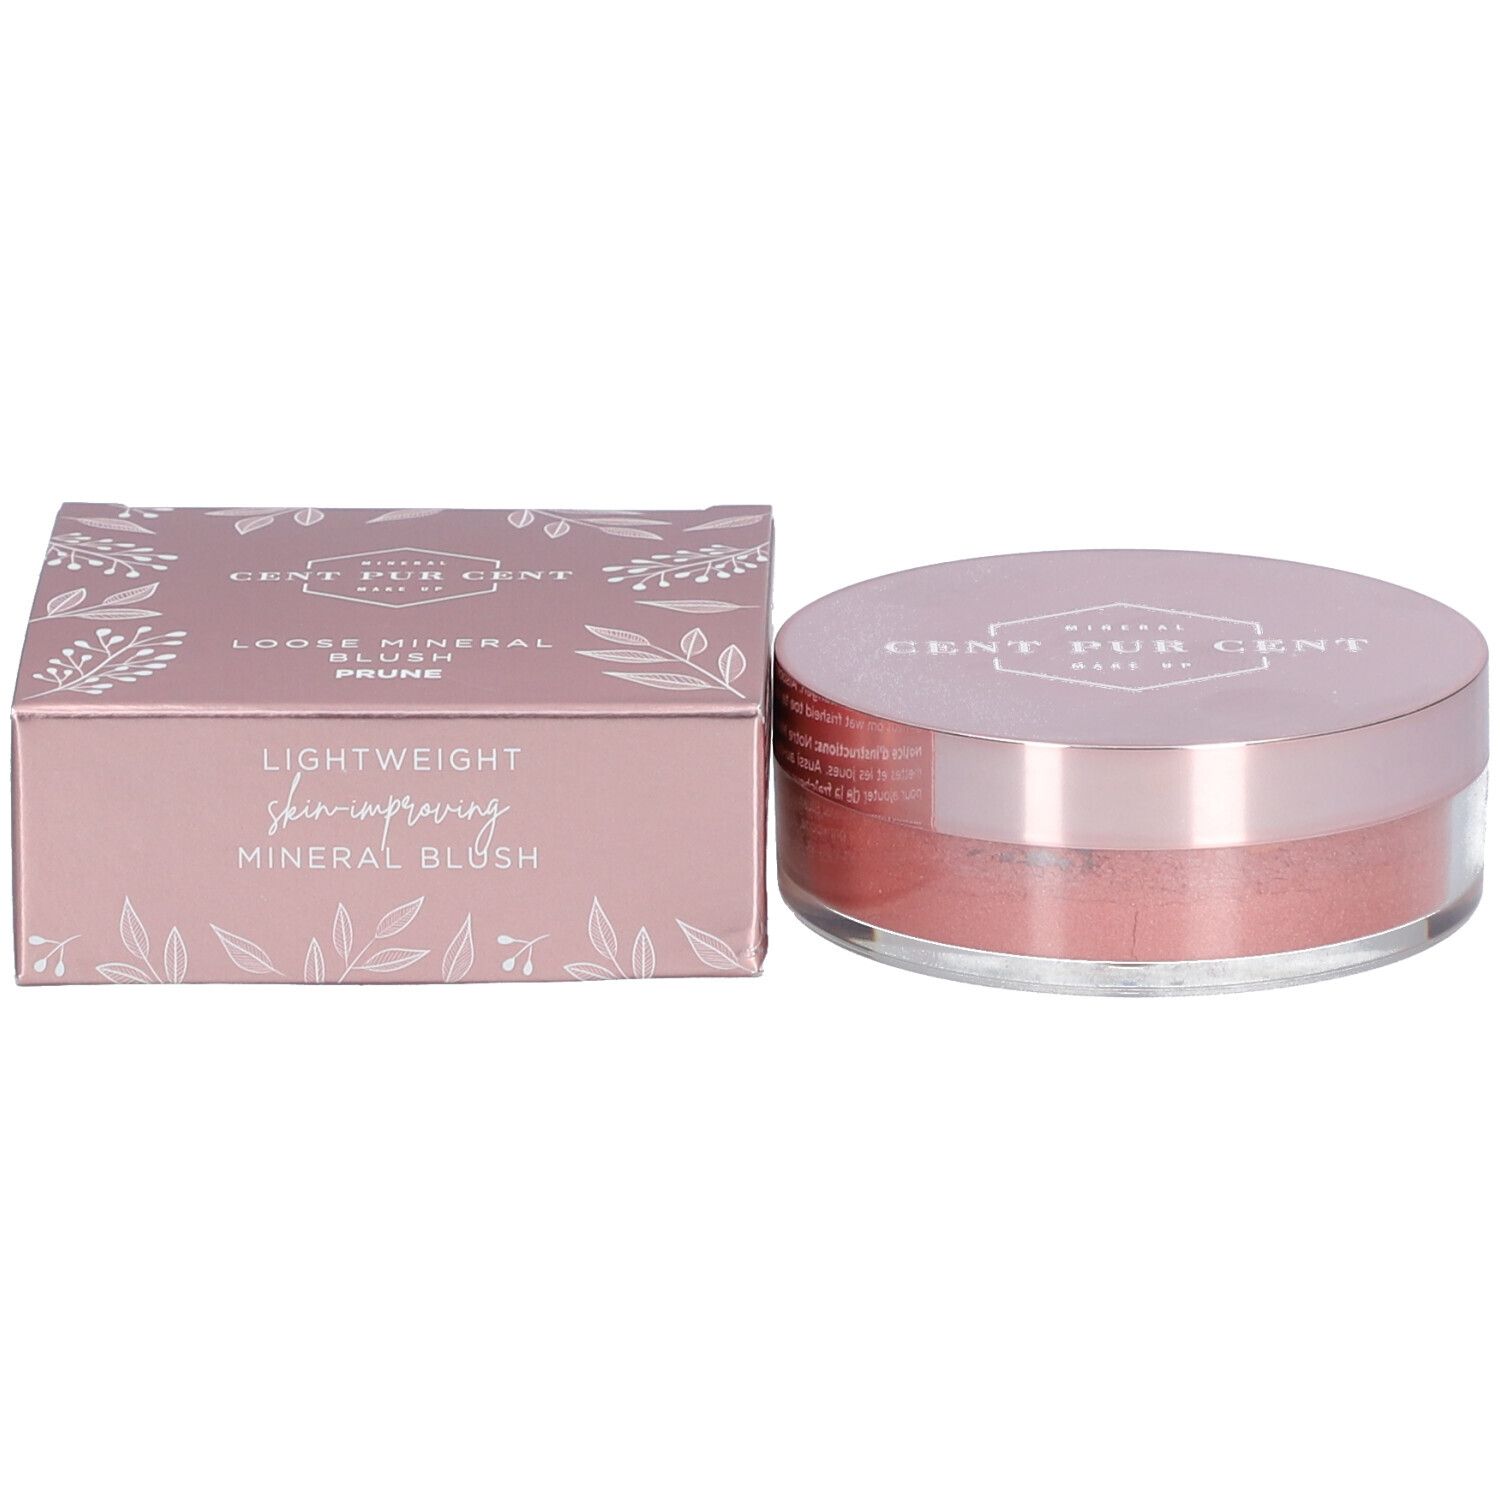 Image of Cent Pur Cent Loose Mineral Blush Pflaume